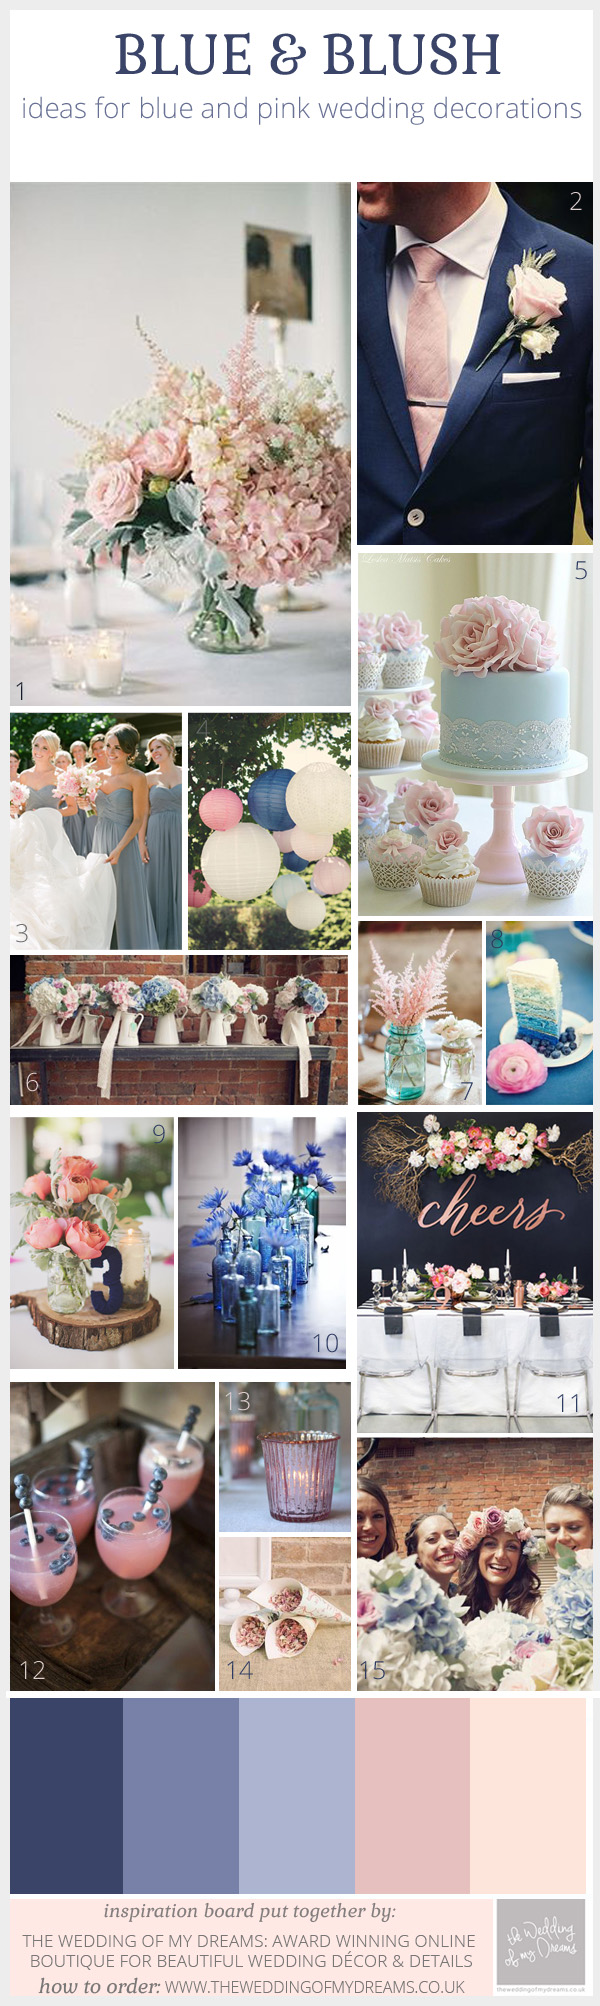 blue and blush pink wedding decorations inspiration board